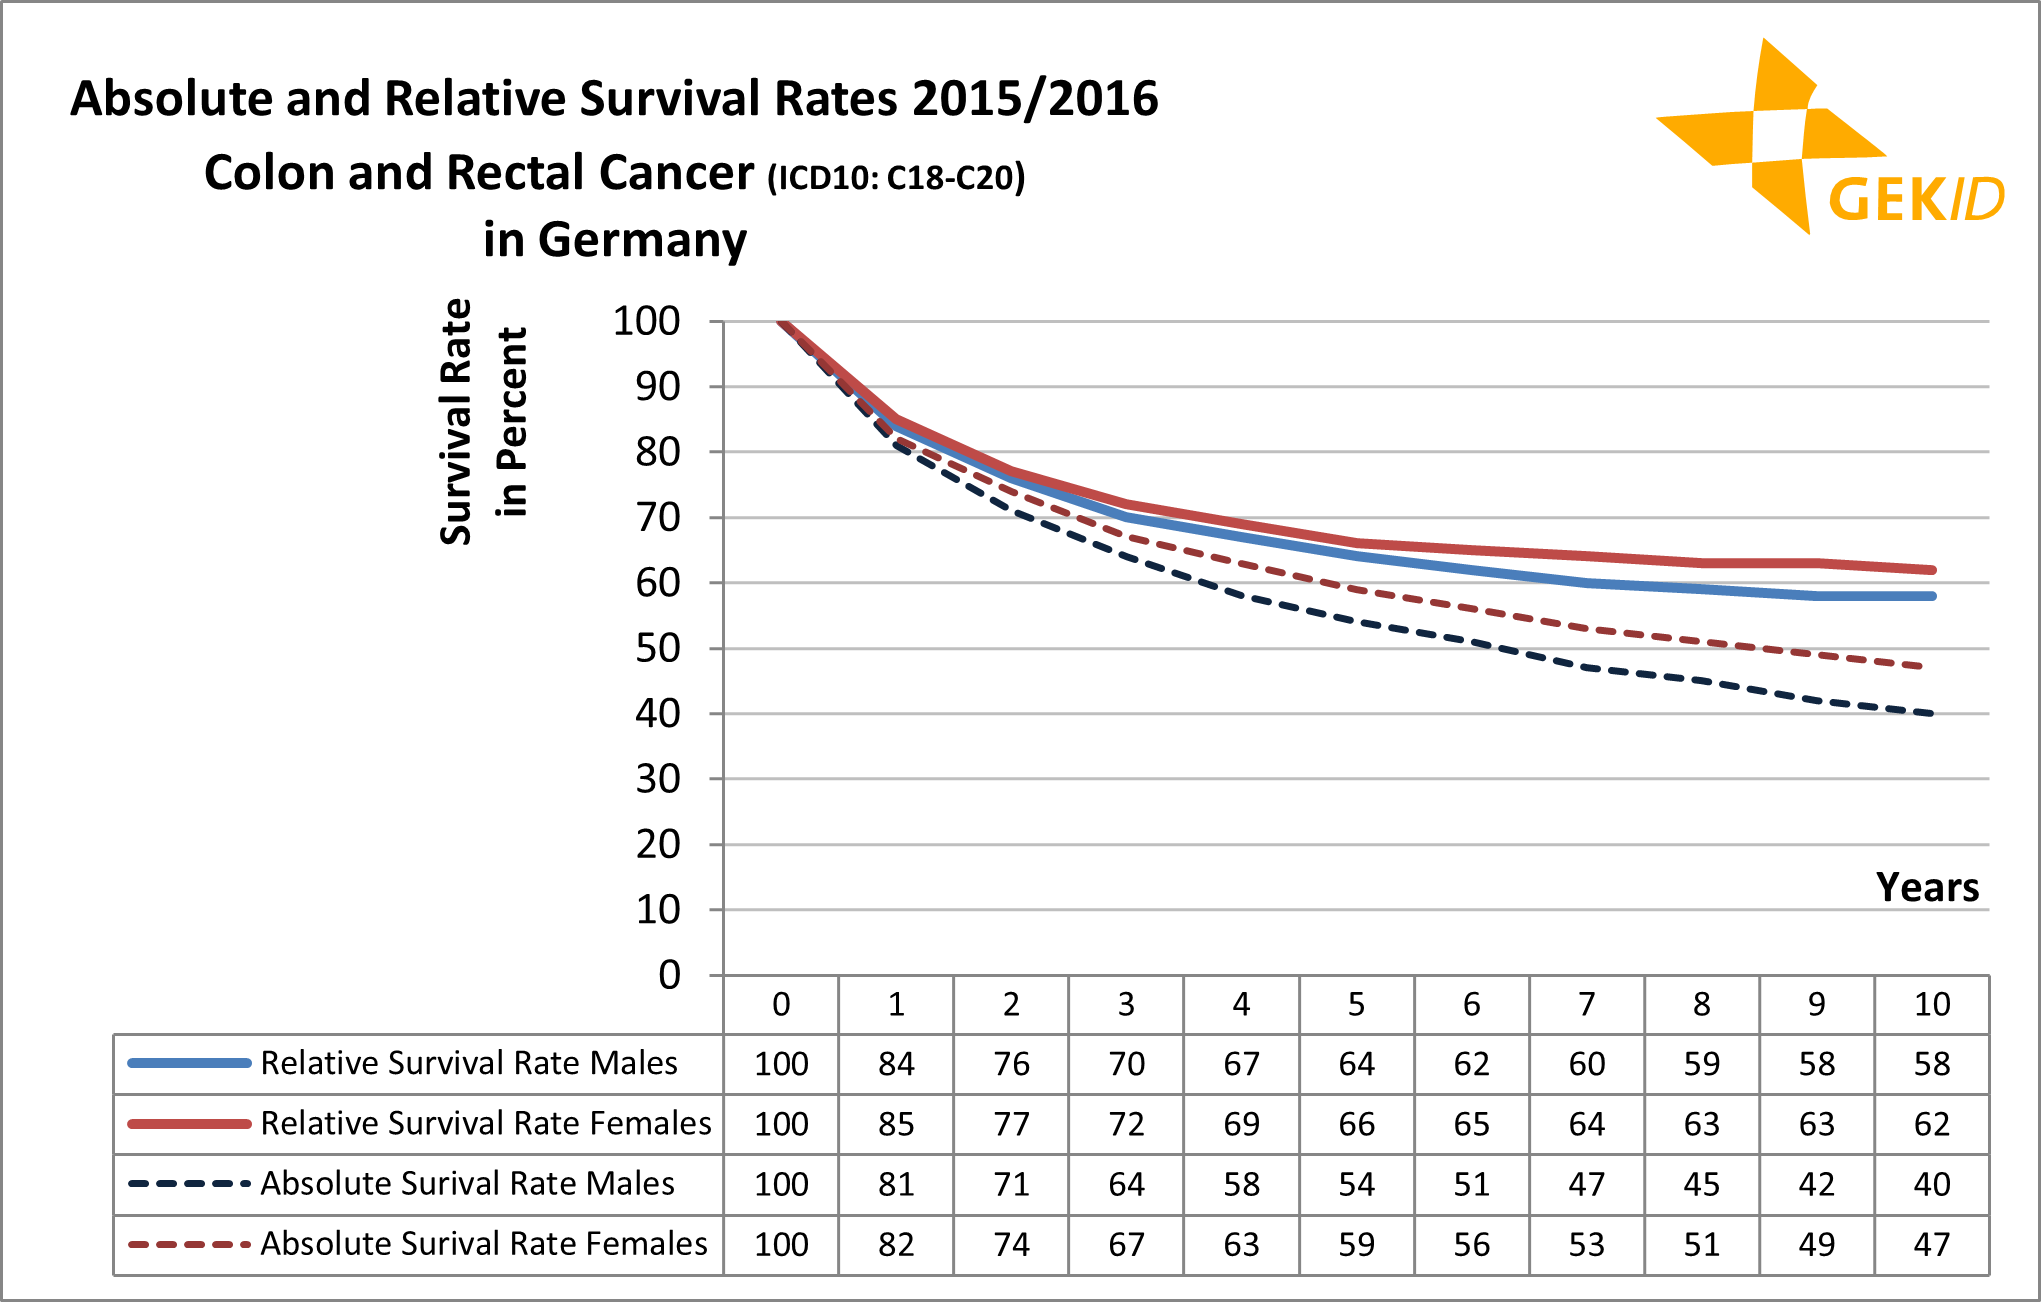 Absolute and relative survival rates for malignant neoplasms of the colon and rectum (ICD 10: C18-C20) 3